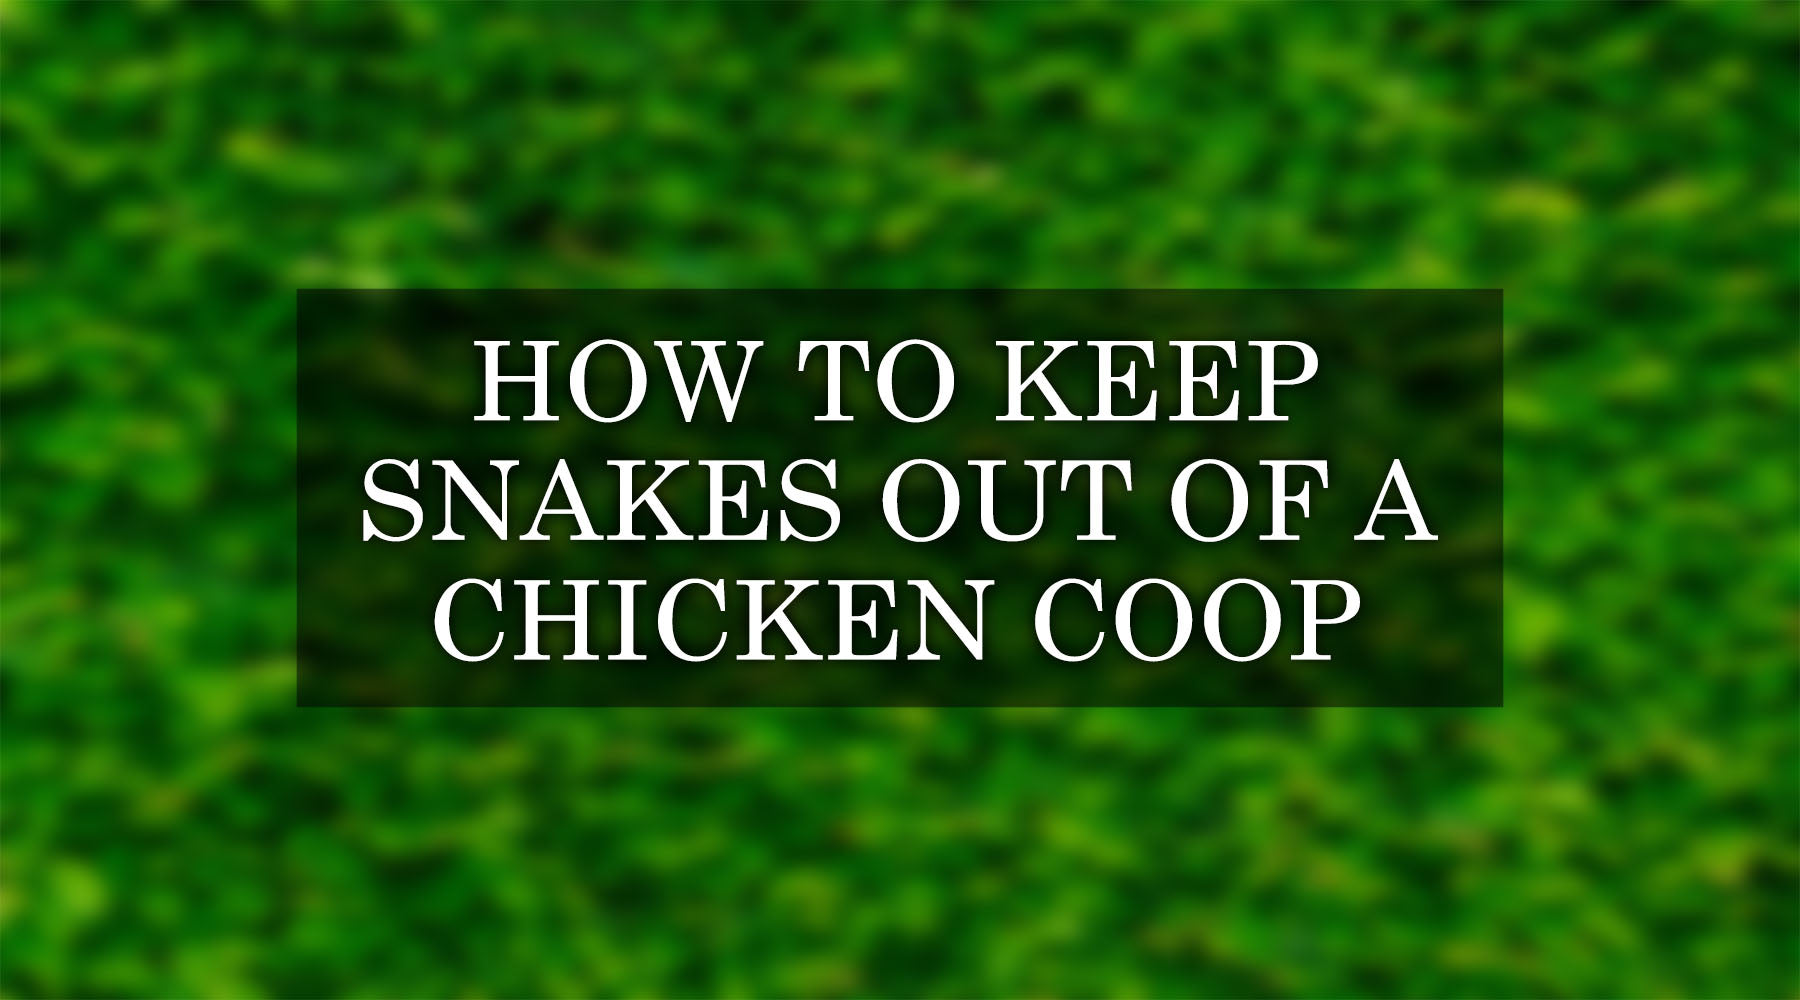 How to Keep Snakes Out of Your Chicken Coop: 9 Easy Tips